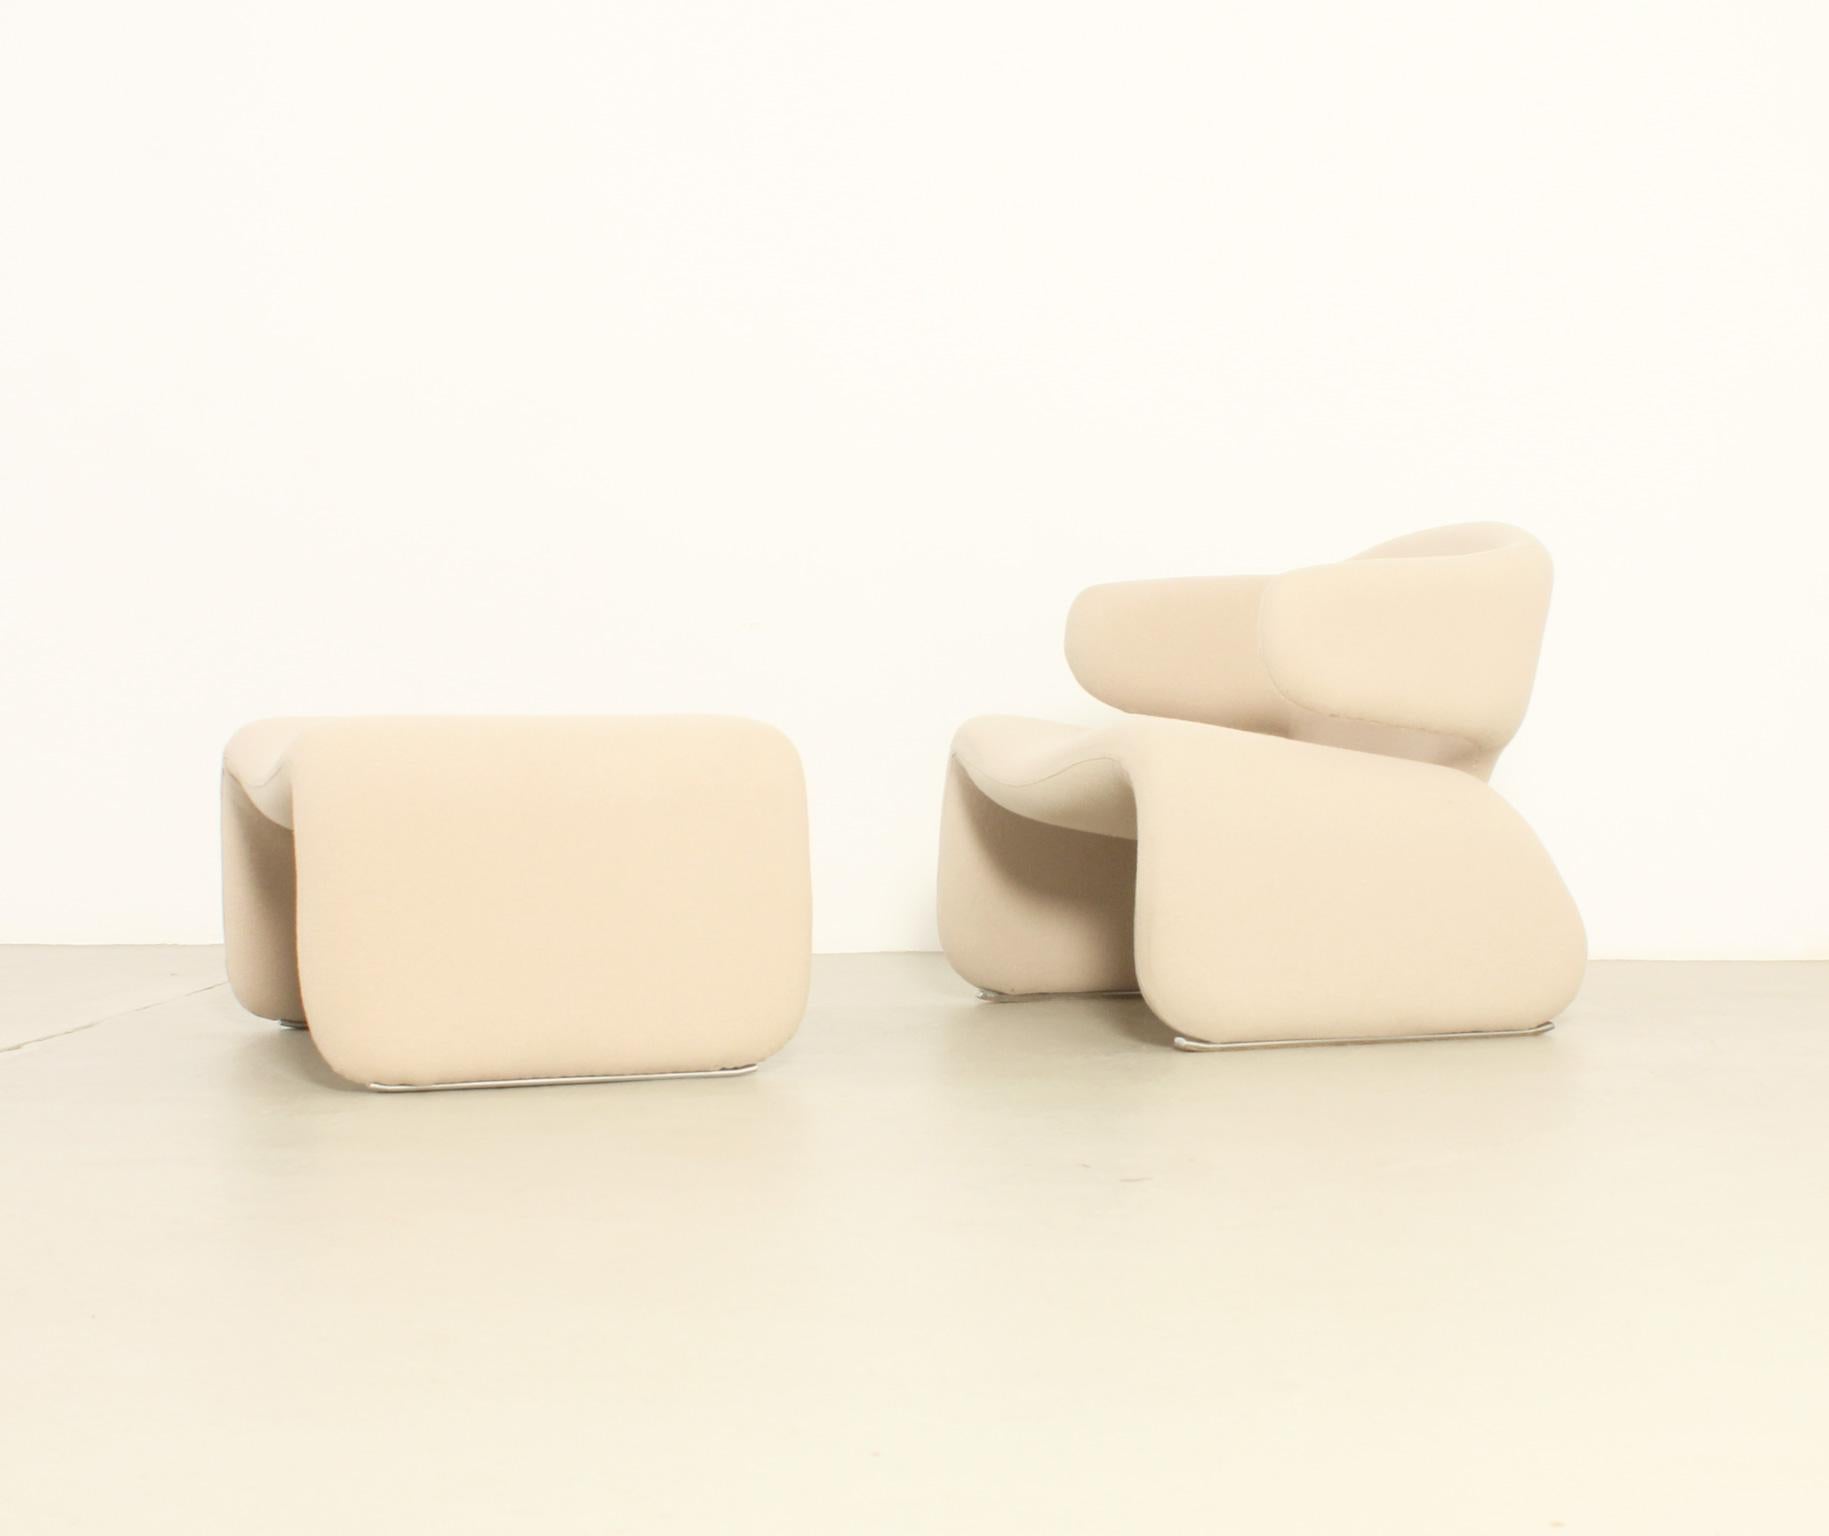 Dijnn Armchair and Ottoman by Olivier Mourgue for Airborne, France, 1965 In Good Condition For Sale In Barcelona, ES